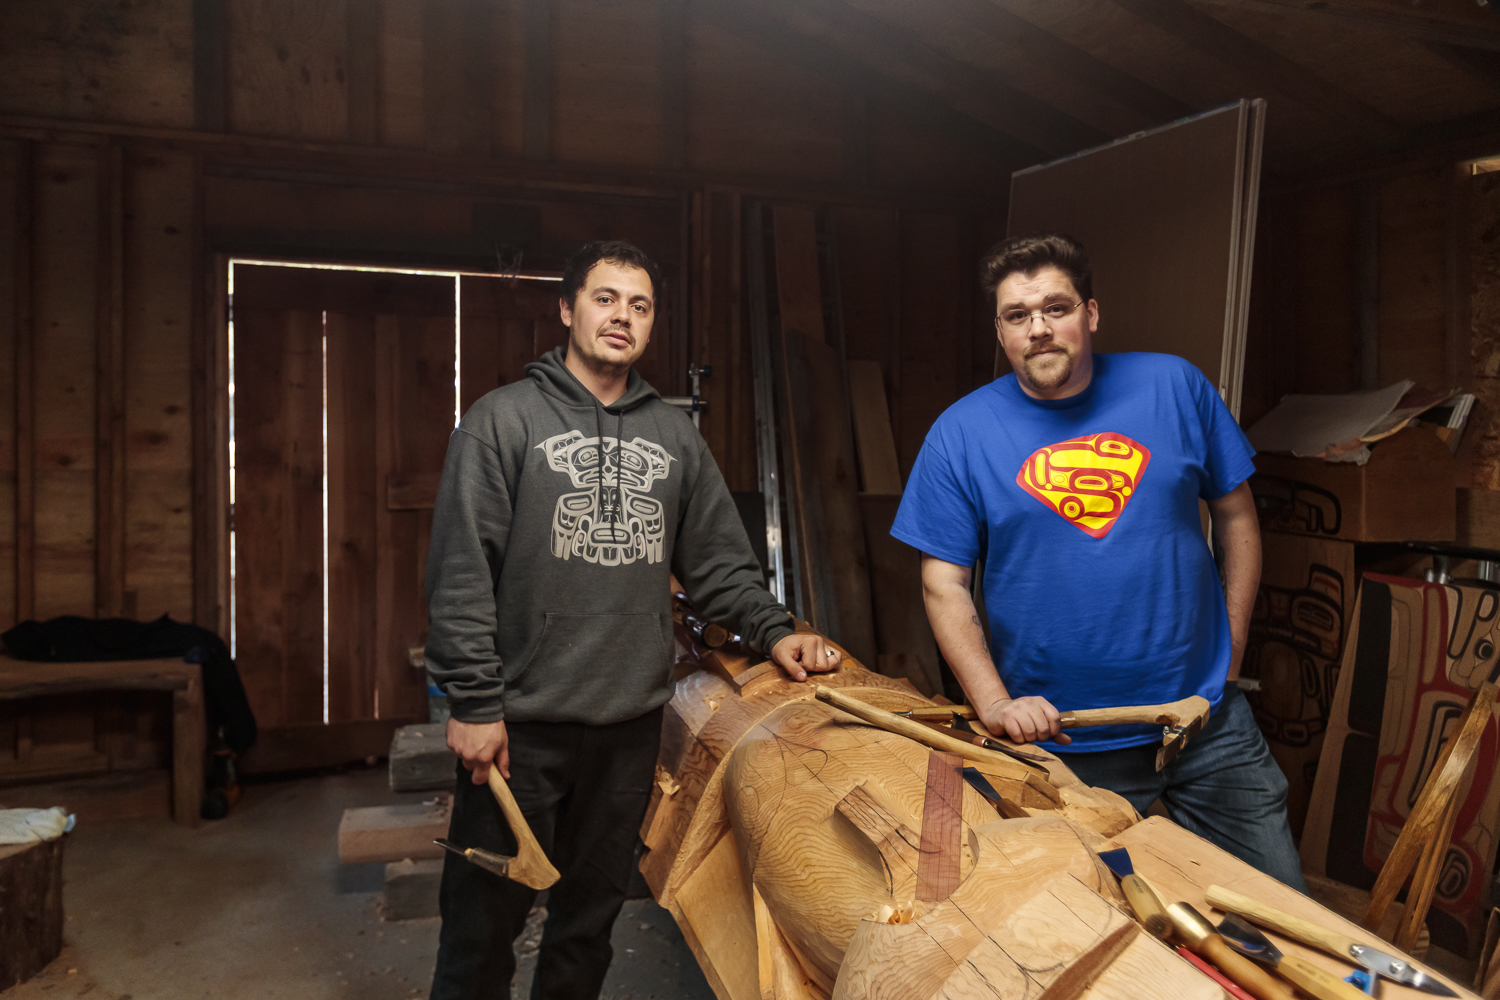 David Robert Boxley (right) and Clifton Guthrie (left) are working on a totem pole for a local non profit in Metlakatla, Alaska. Both David and Clifton create amazing pieces of traditional and non traditional Tsimshian art for communities, galleries…